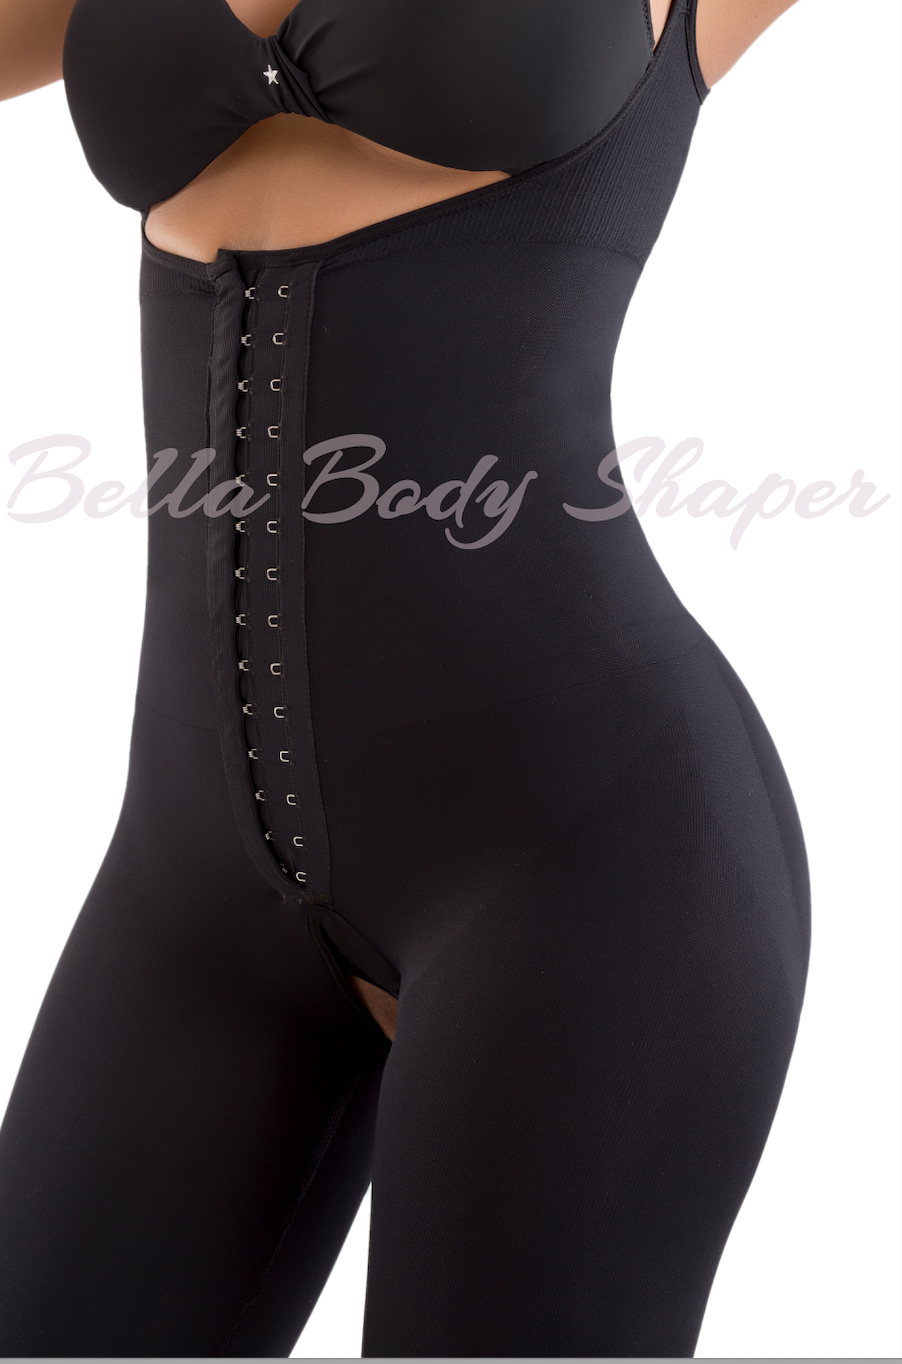 Body Shaper Price Starting From Rs 776. Find Verified Sellers in Hyderabad  - JdMart